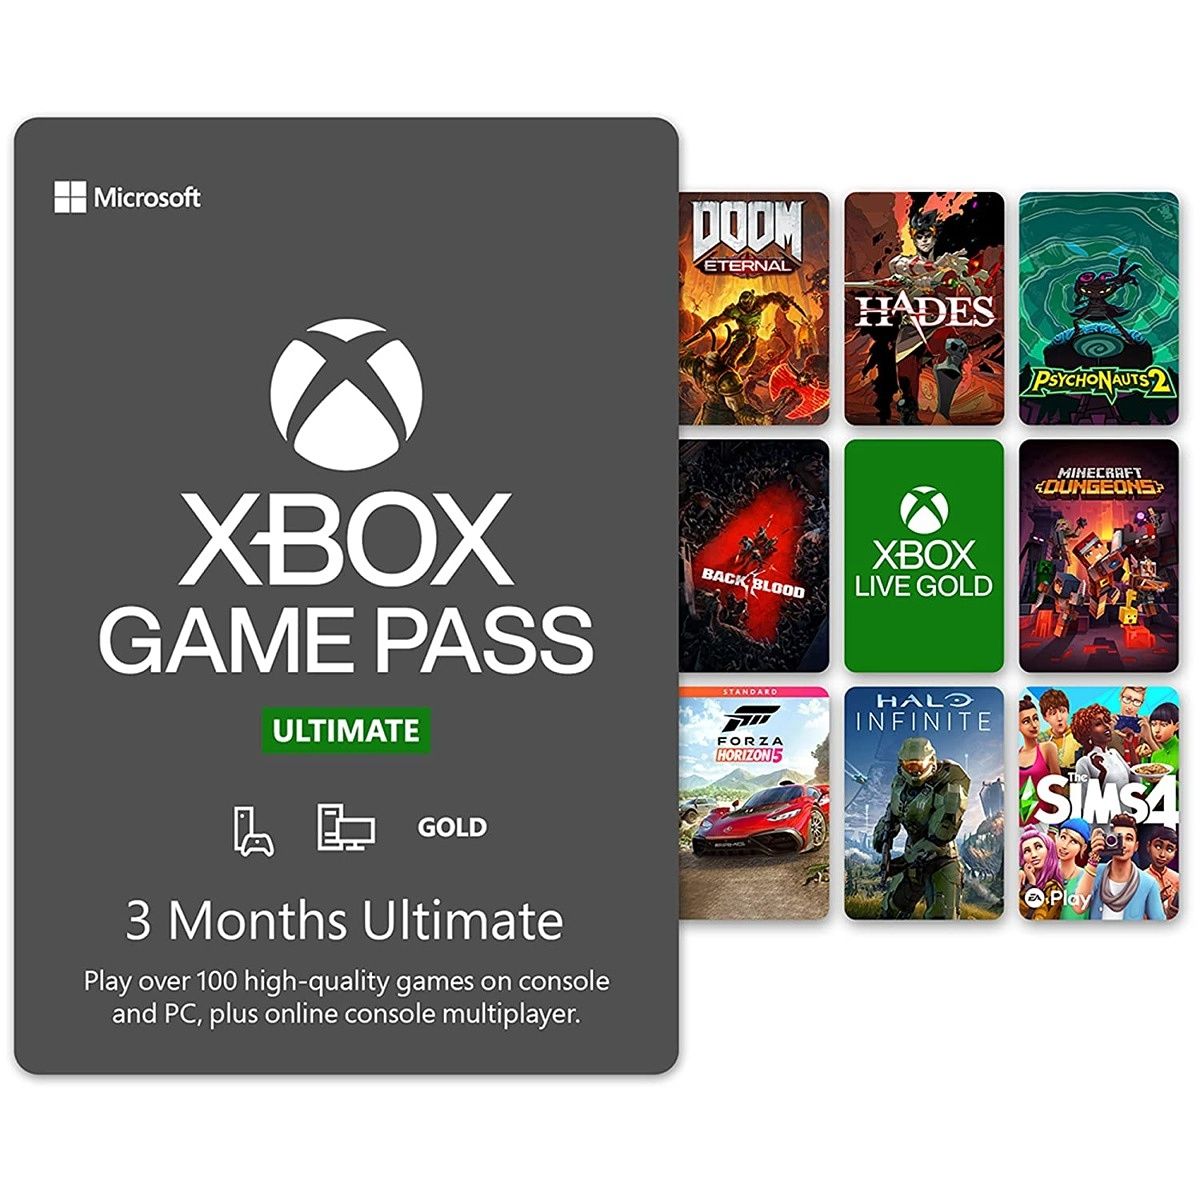 Xbox Game Pass Ultimate gives you access to over 100 games on Xbox and PC, including access to cloud gaming so you can play on the Surface Pro 9.